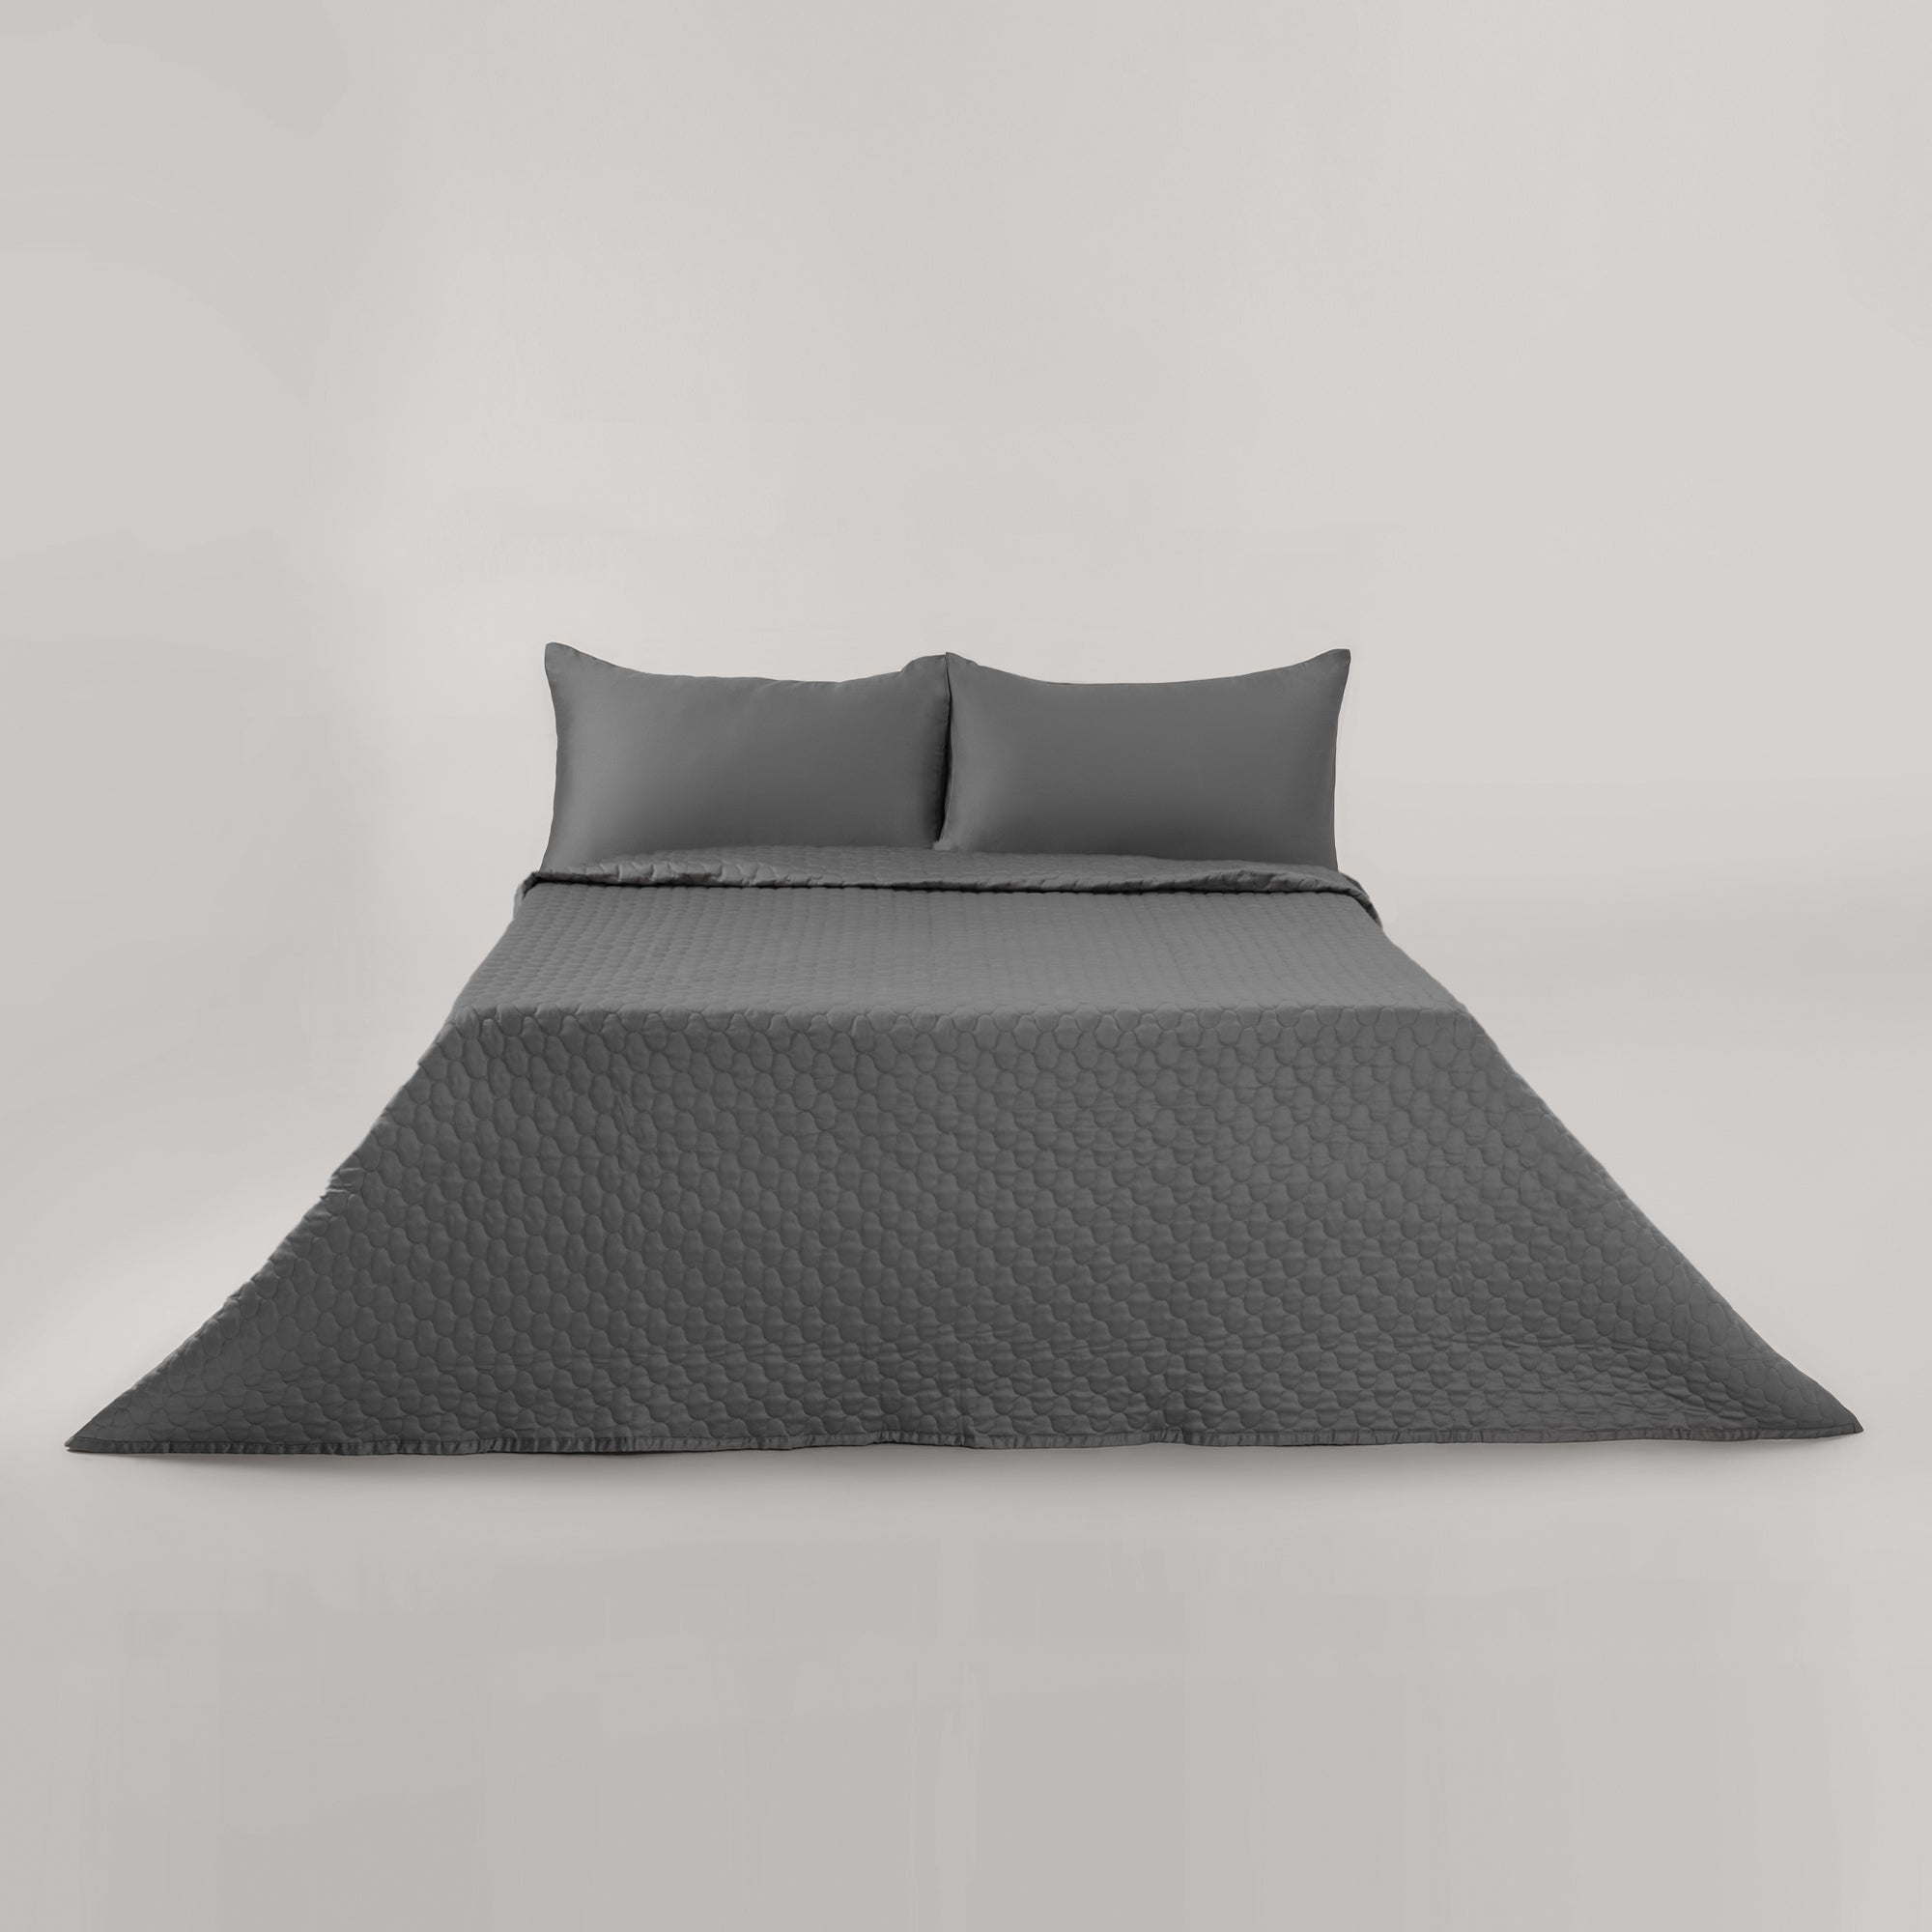 The Linen Company Bedding King Soot BedSpread Set